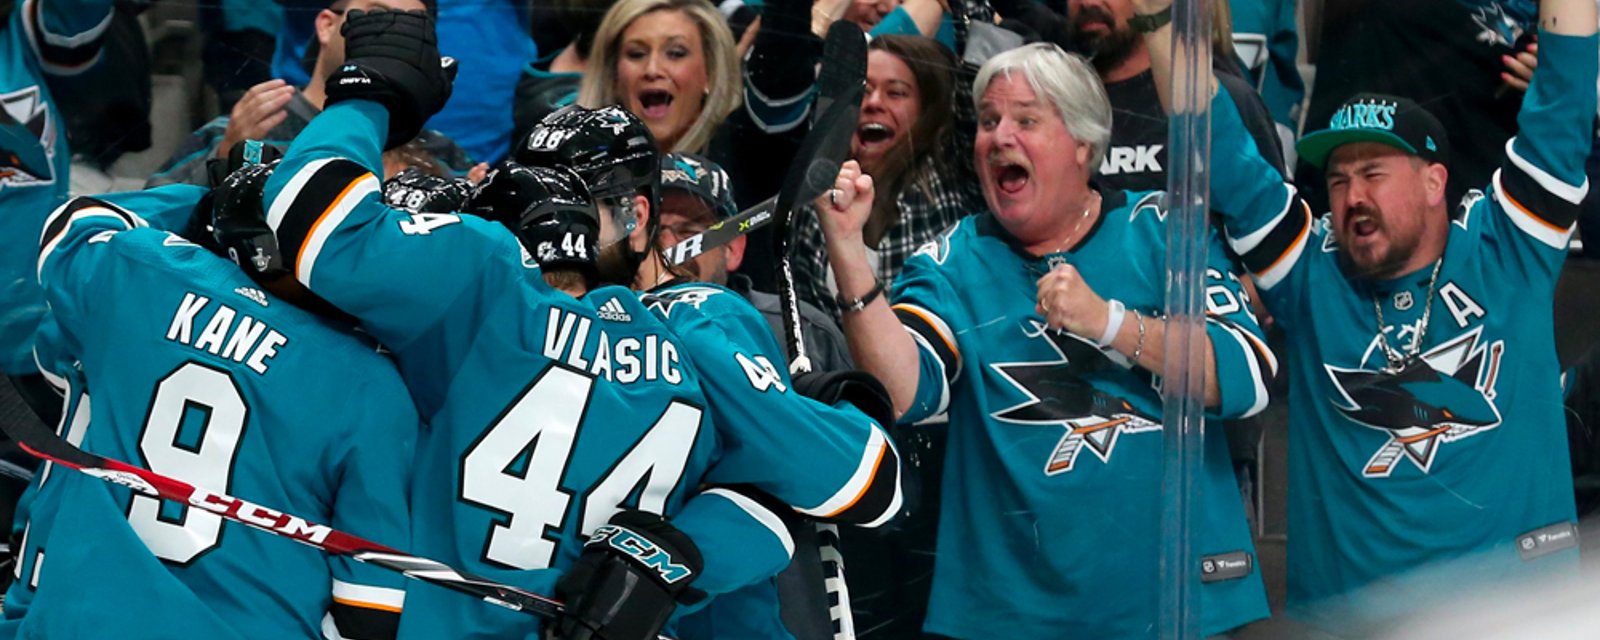 Early rumblings that the Sharks may be forced to relocate